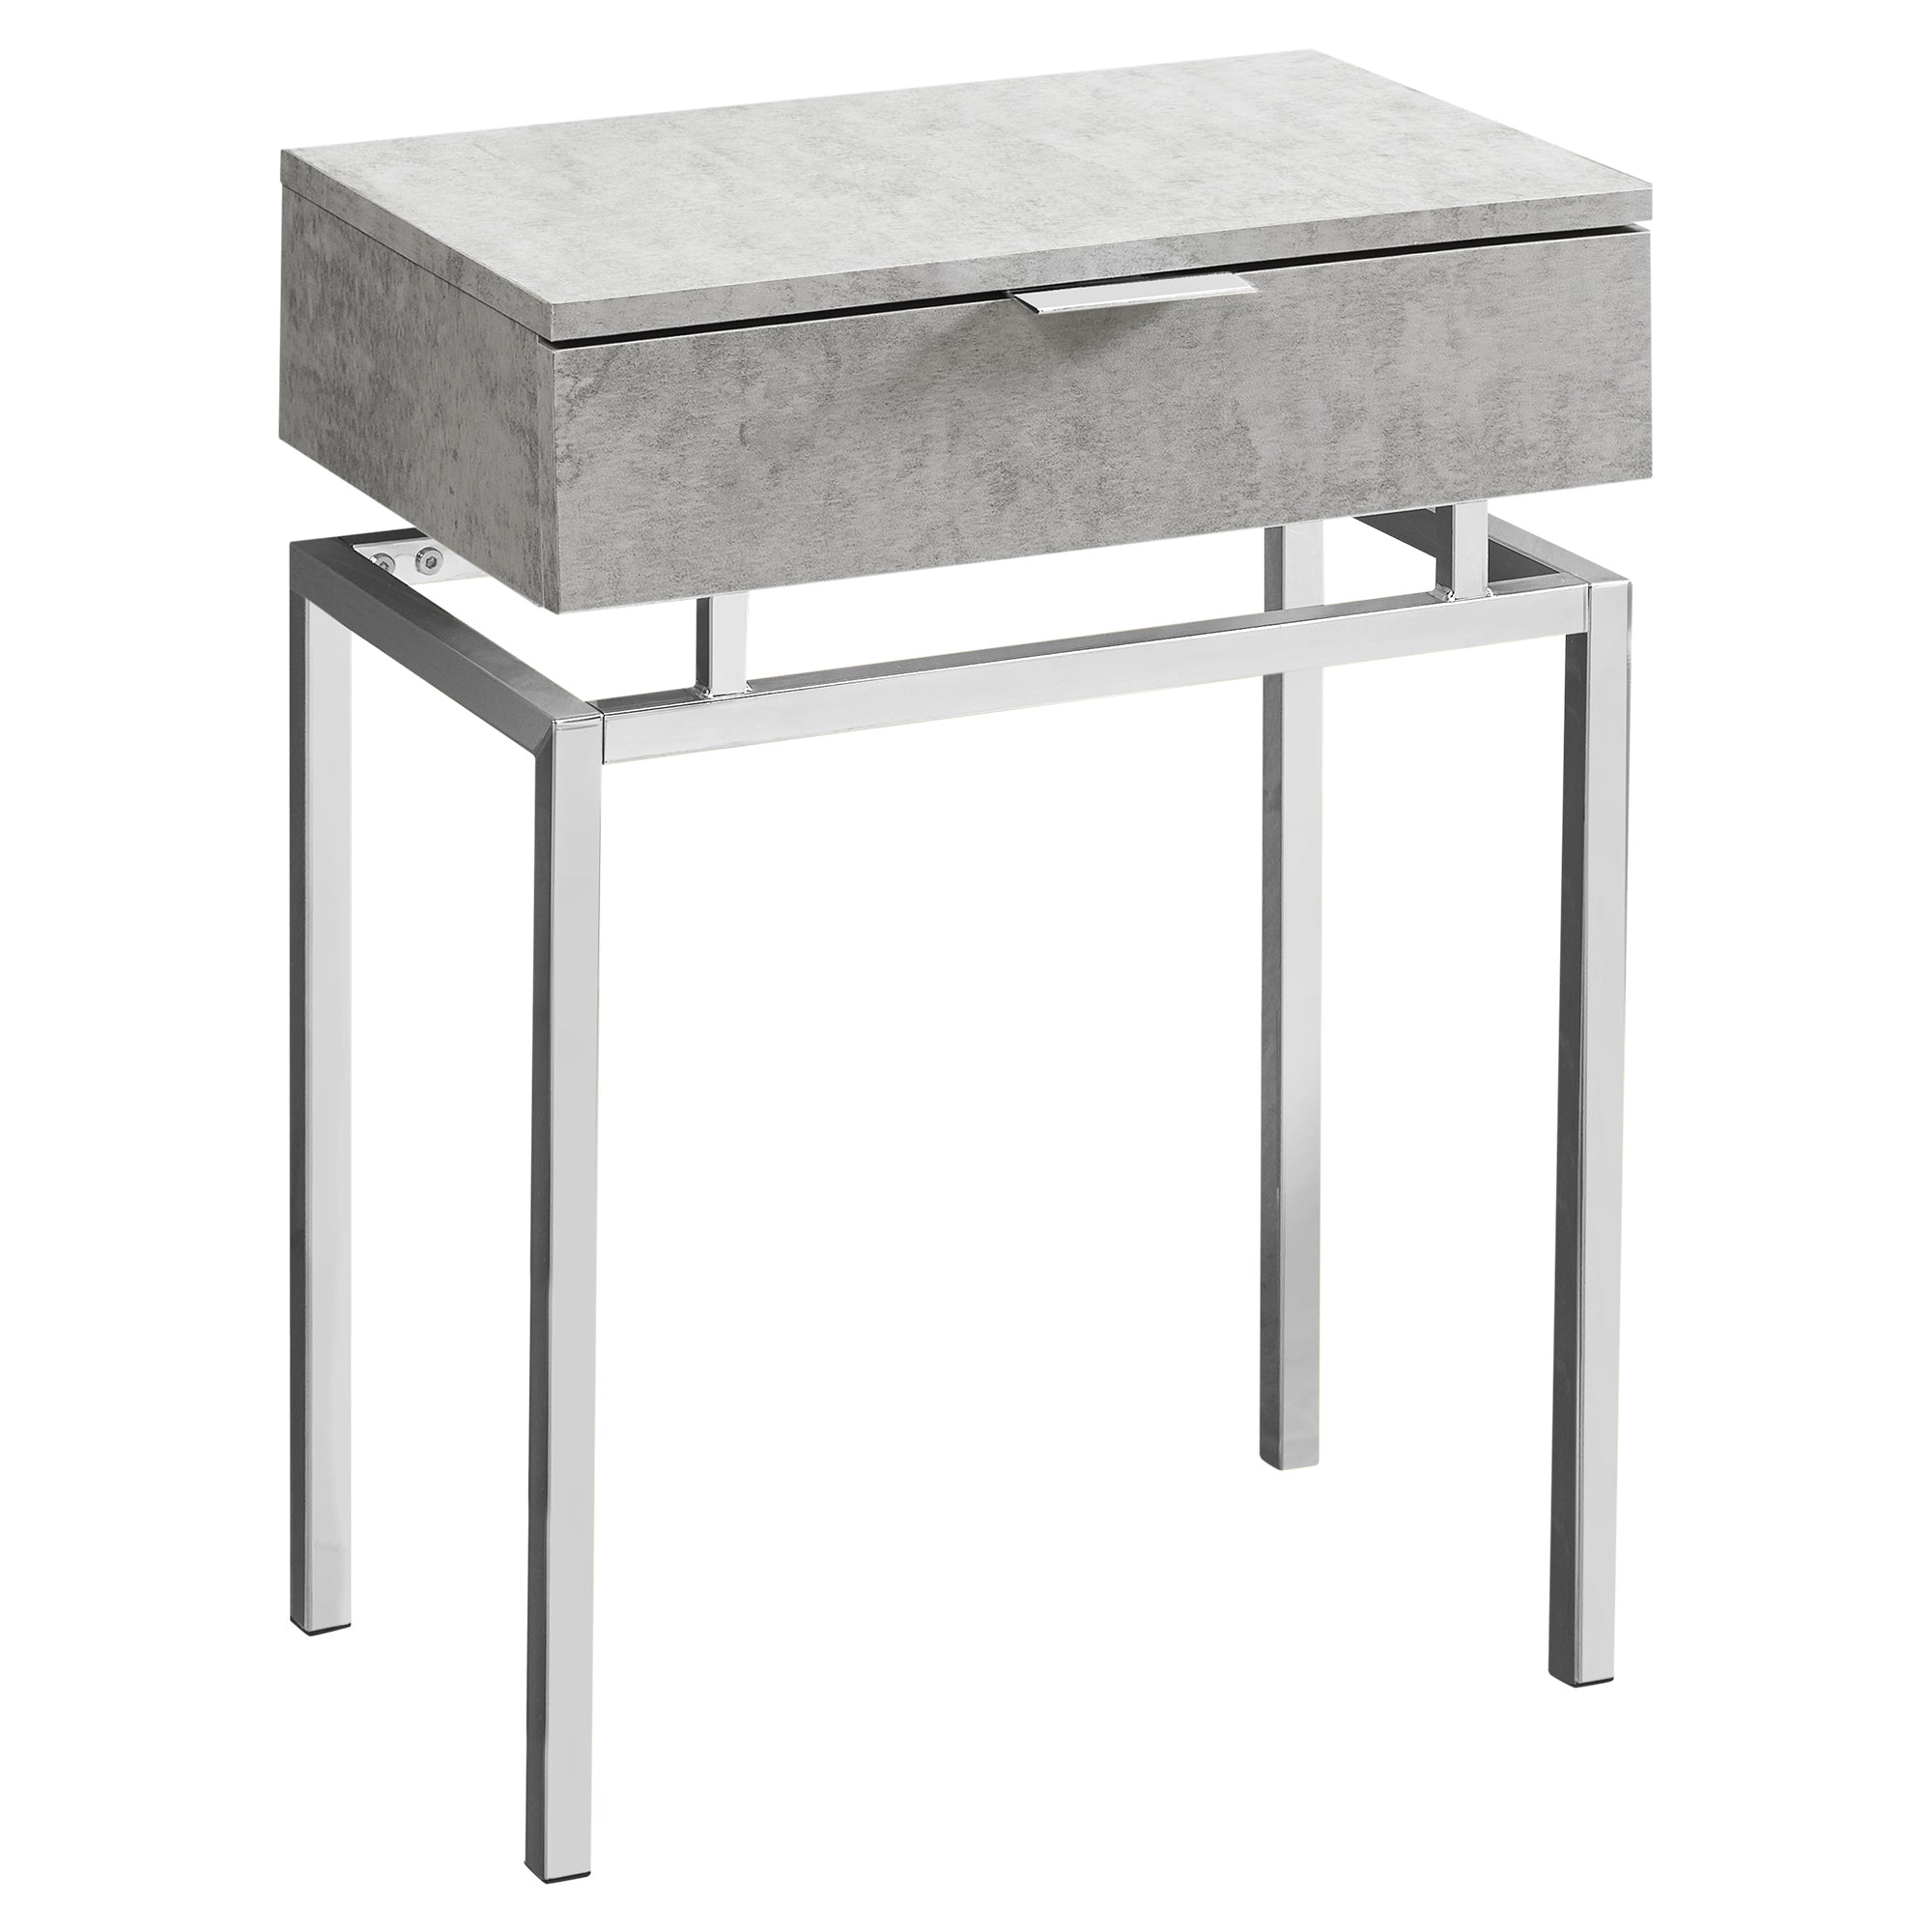 MN-753461    Accent Table, Side, End, Nightstand, Lamp, Living Room, Bedroom, Metal Legs, Laminate, Grey Cement Look, Chrome, Contemporary, Modern